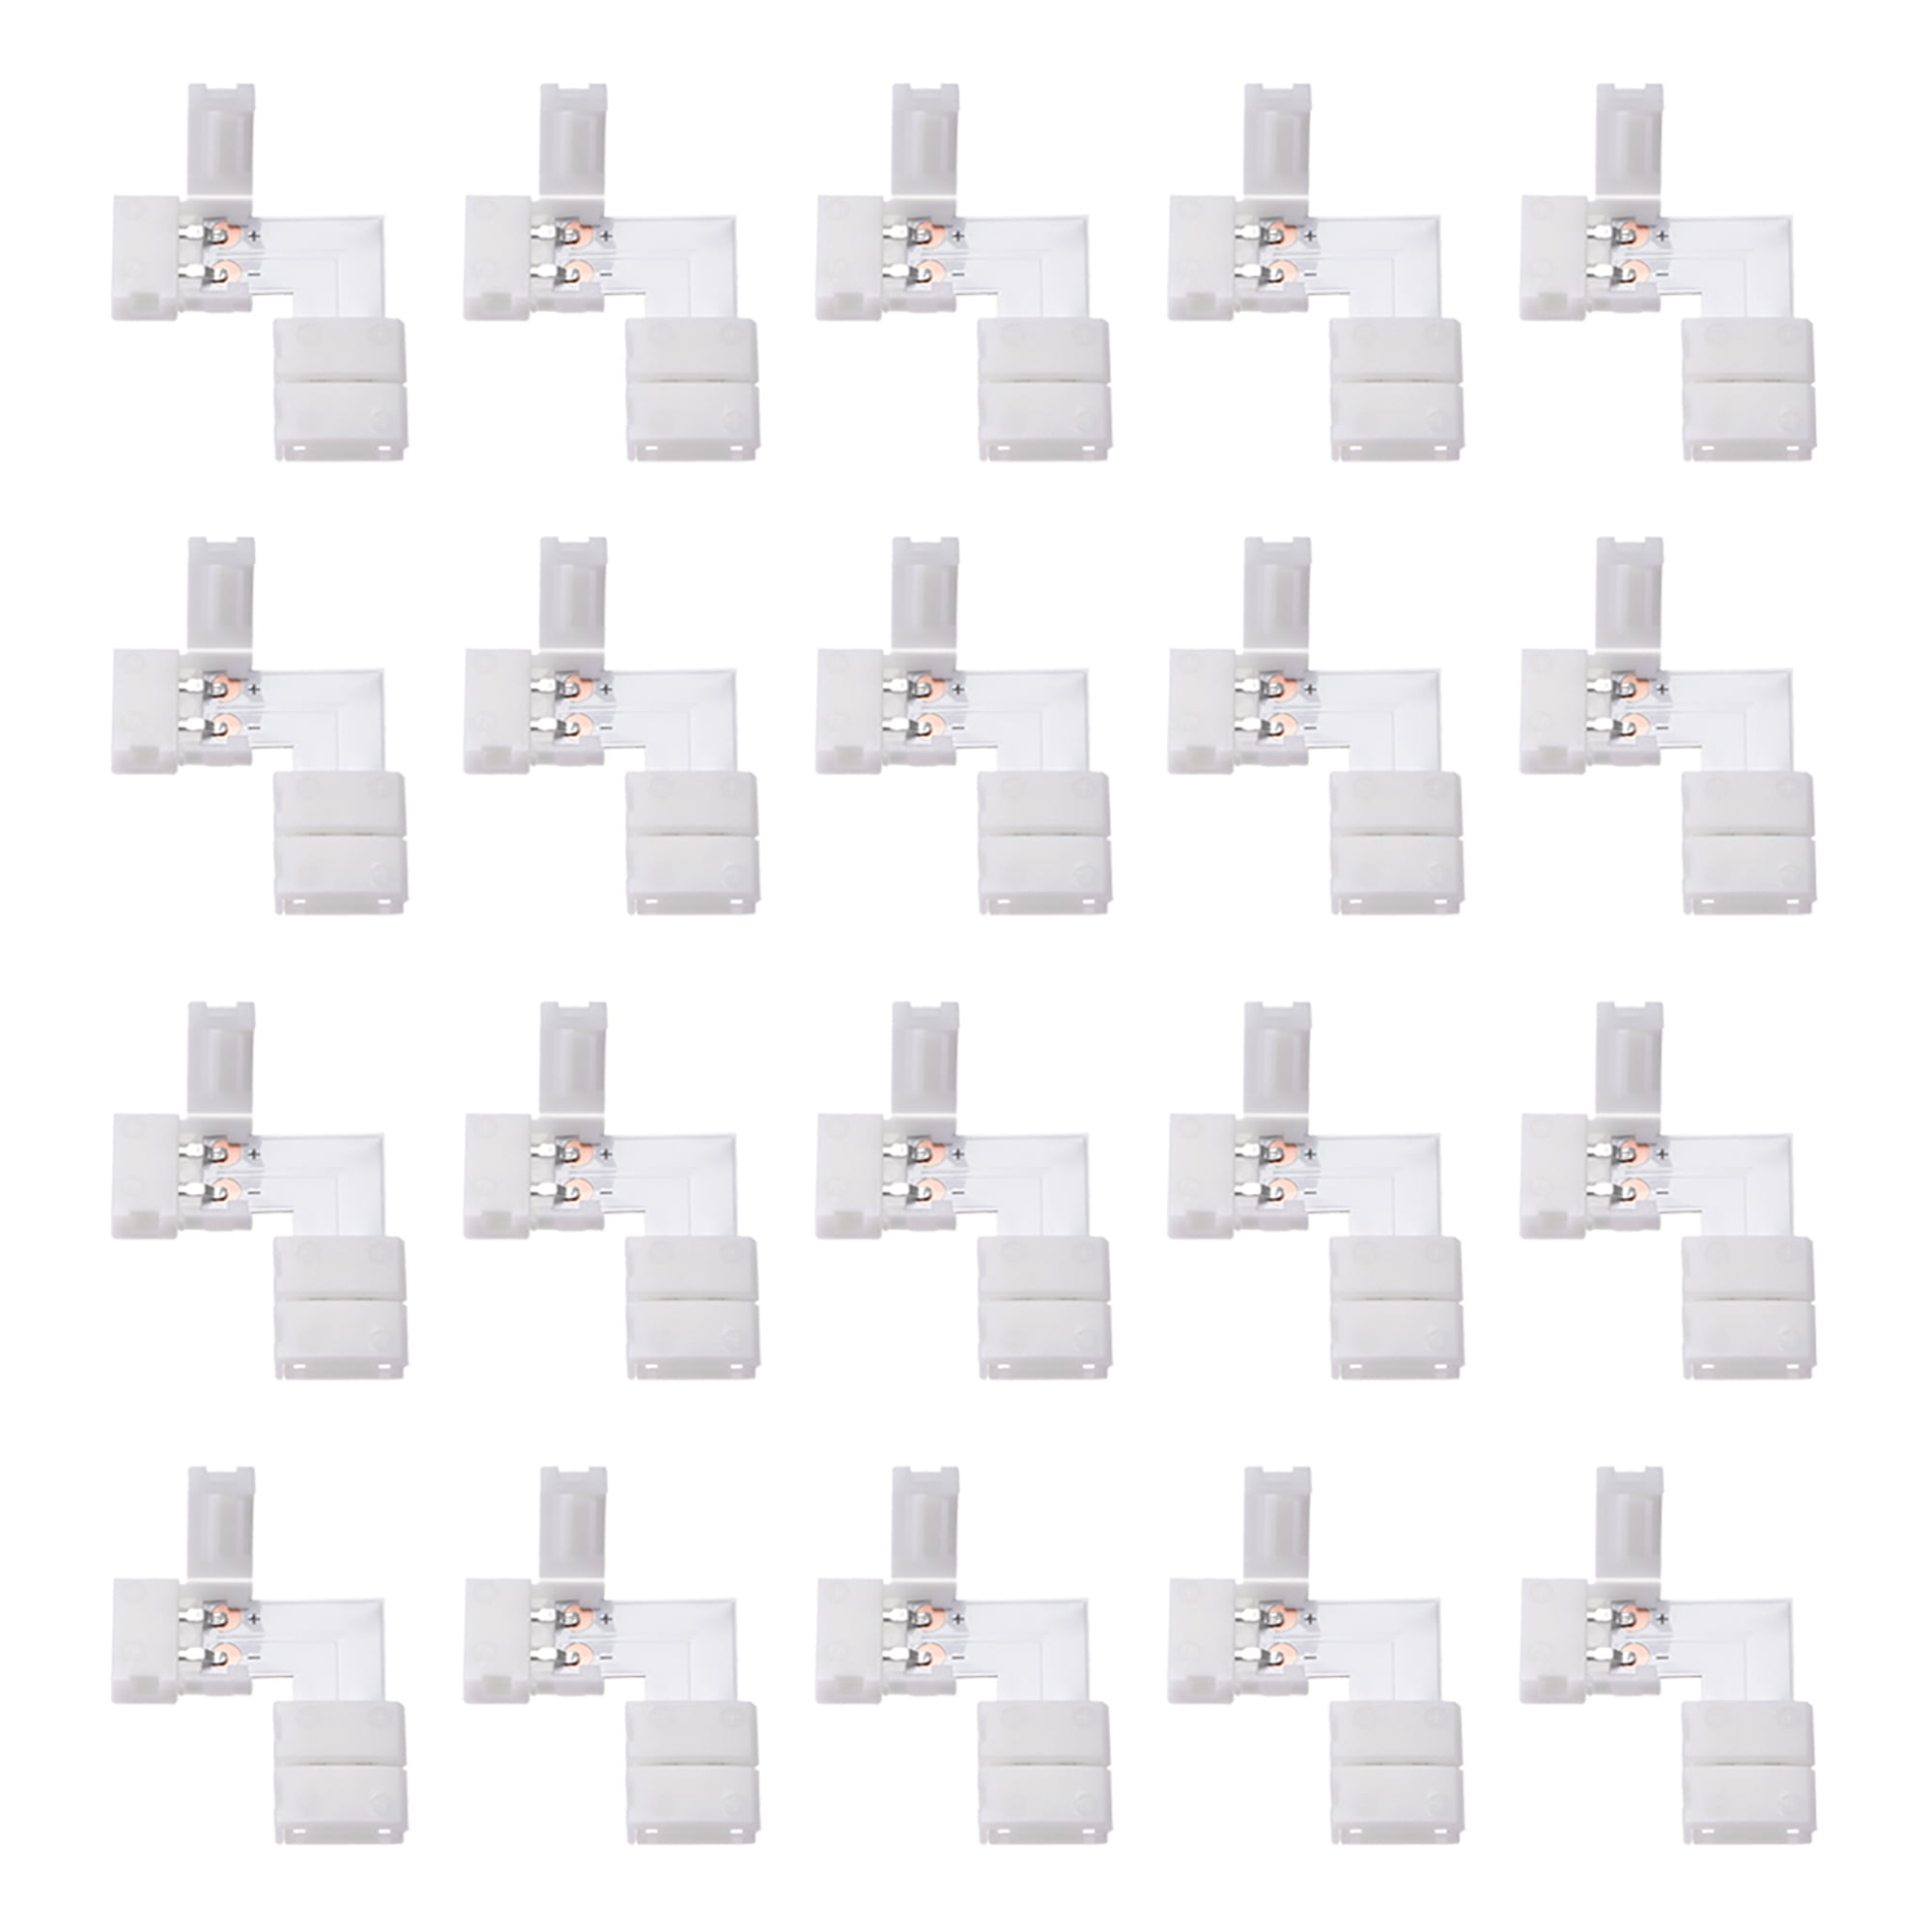 SMD 2835 White Connector Corner Plus Angle 1 2 3 5 10 50 piece without soldering 8mm LED 